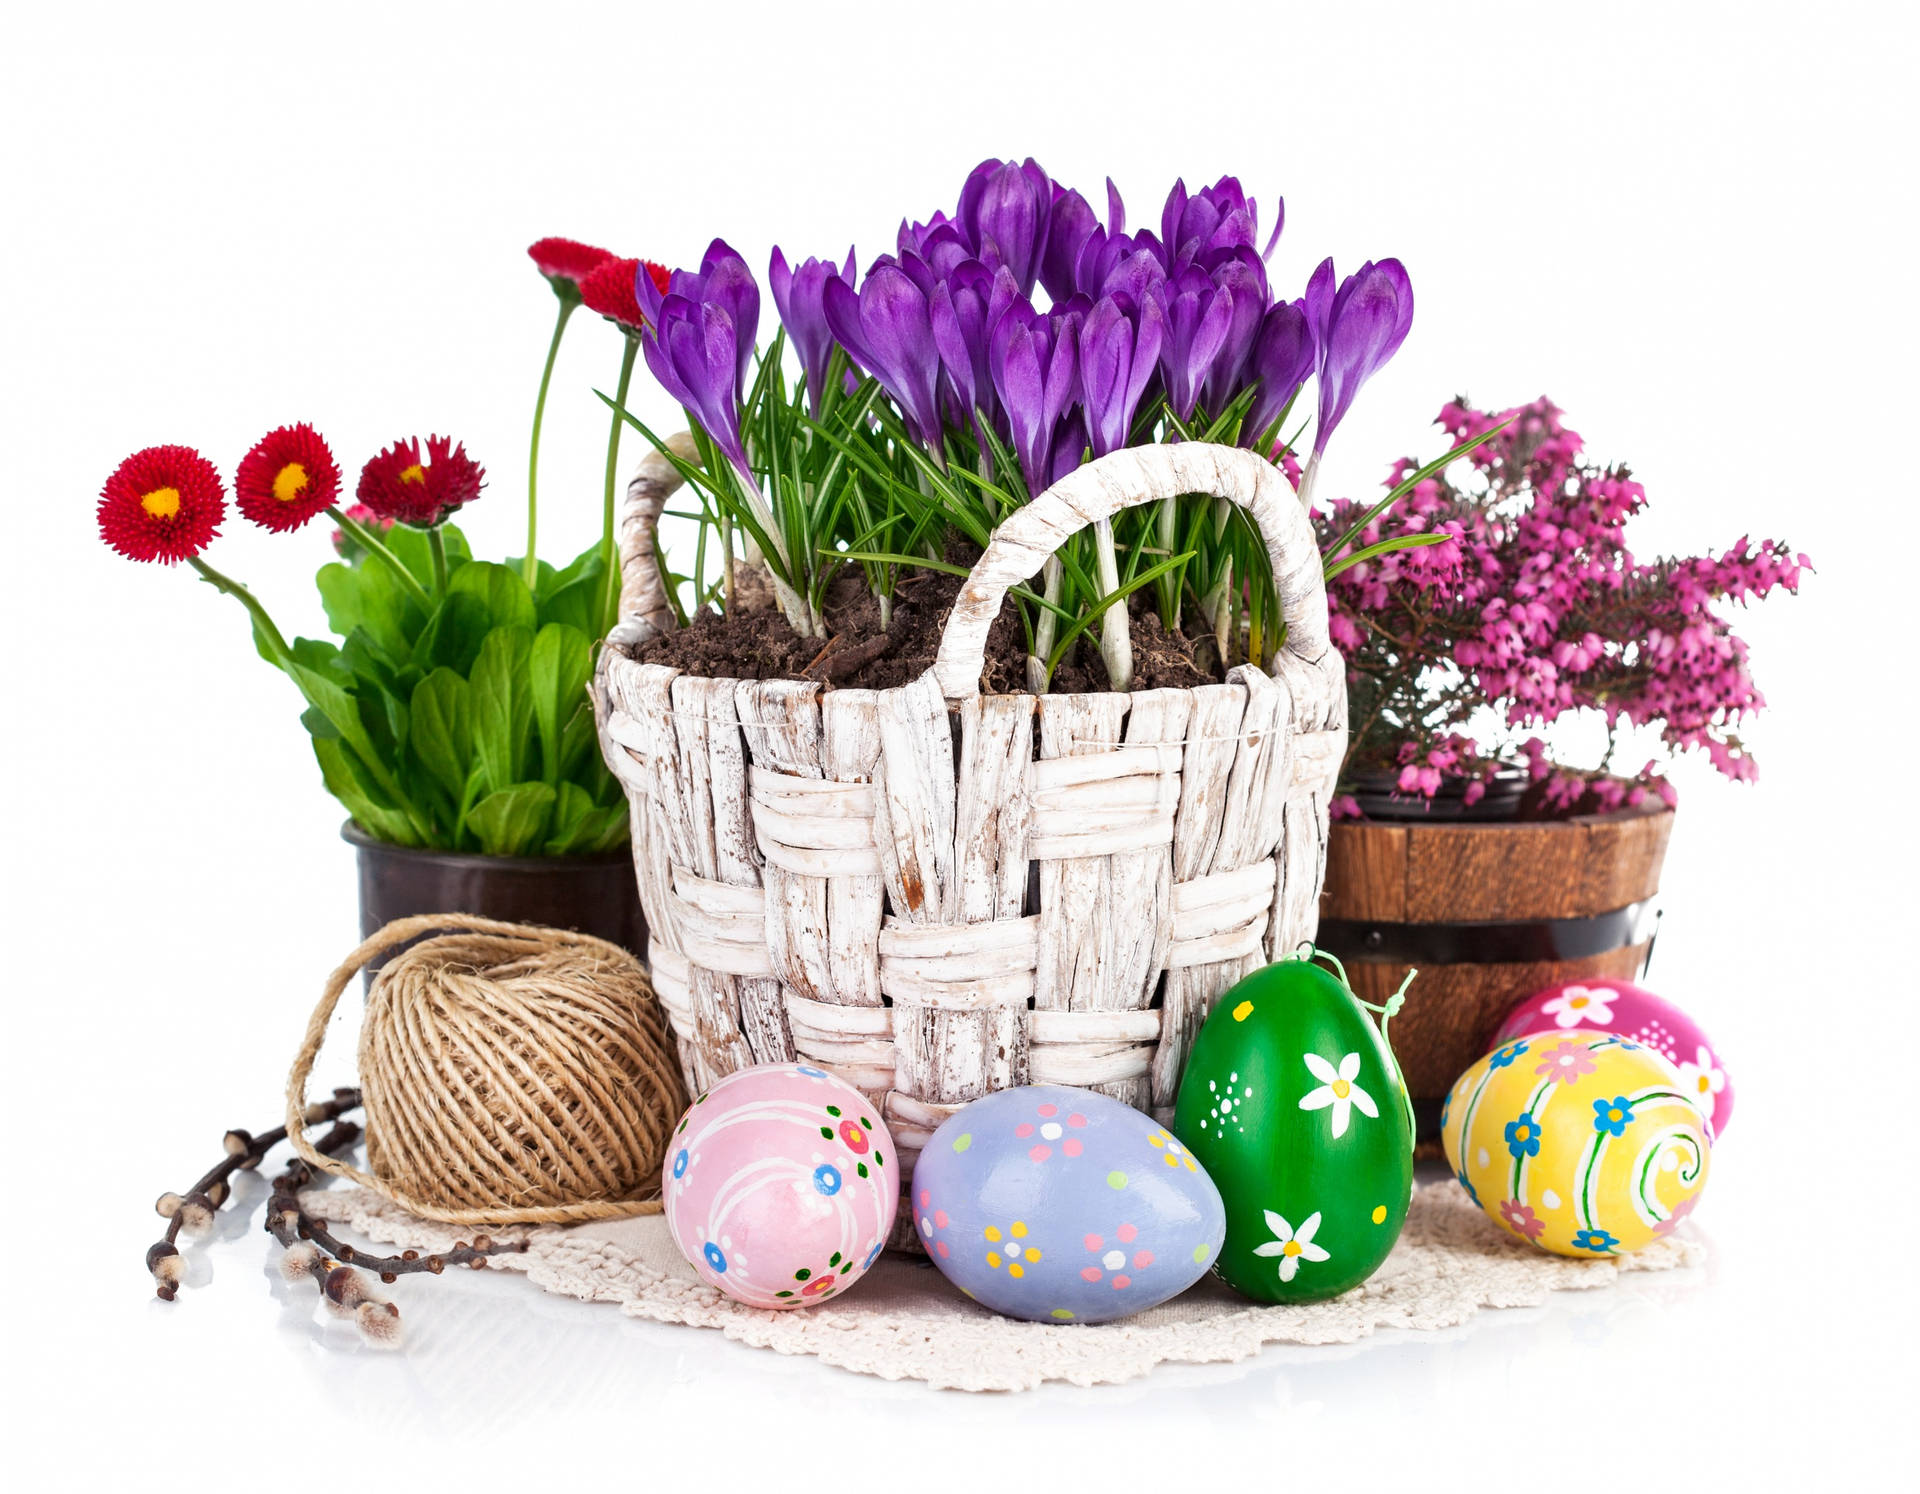 Cute Easter Holiday Decor